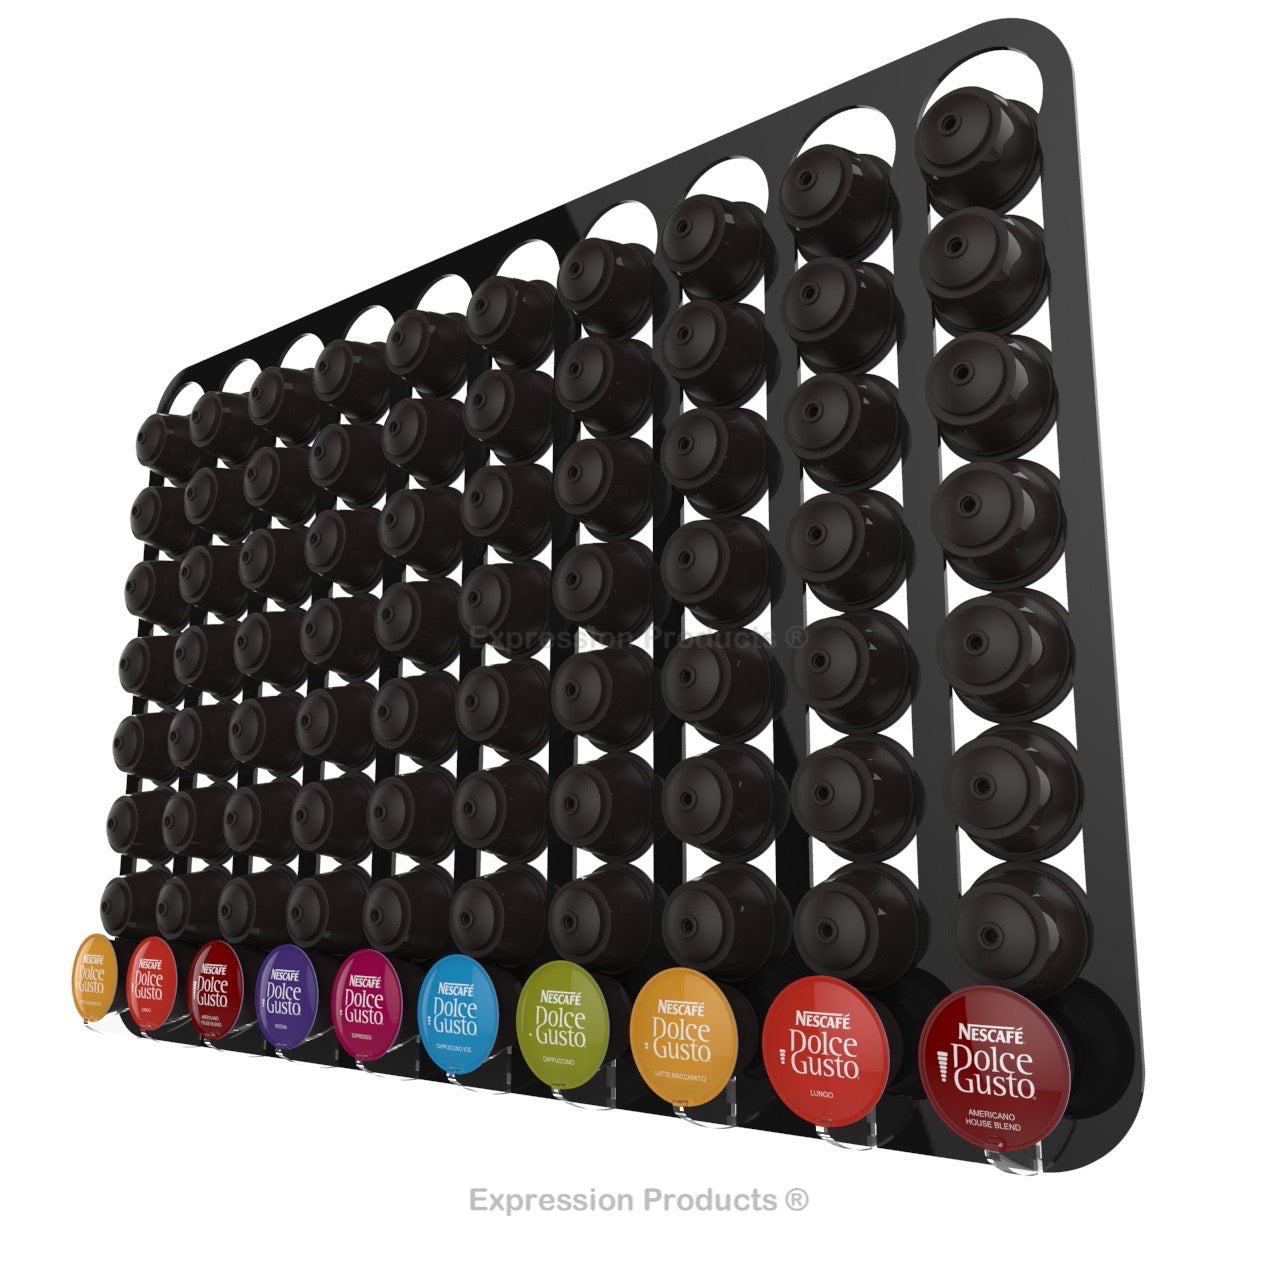 Dolce Gusto Coffee Pod Holder, Wall Mounted.  Shown in Black Holding 80 Pods